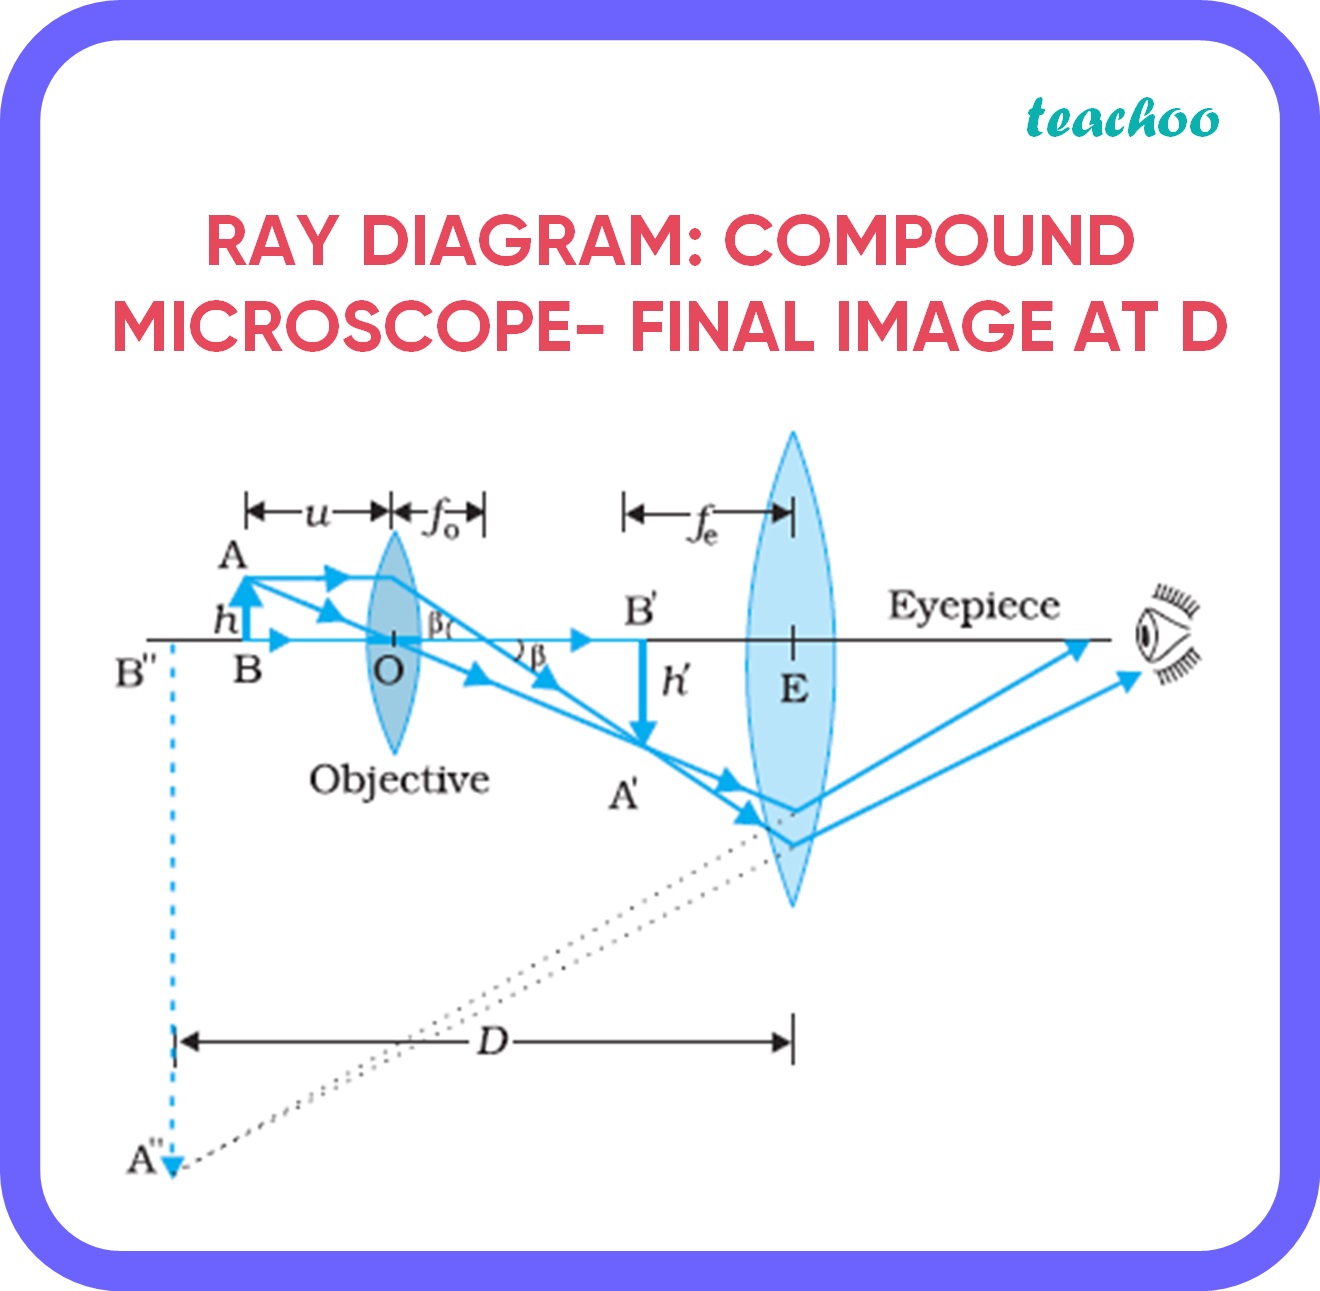 Draw A Ray Diagram Of Compound Microscope